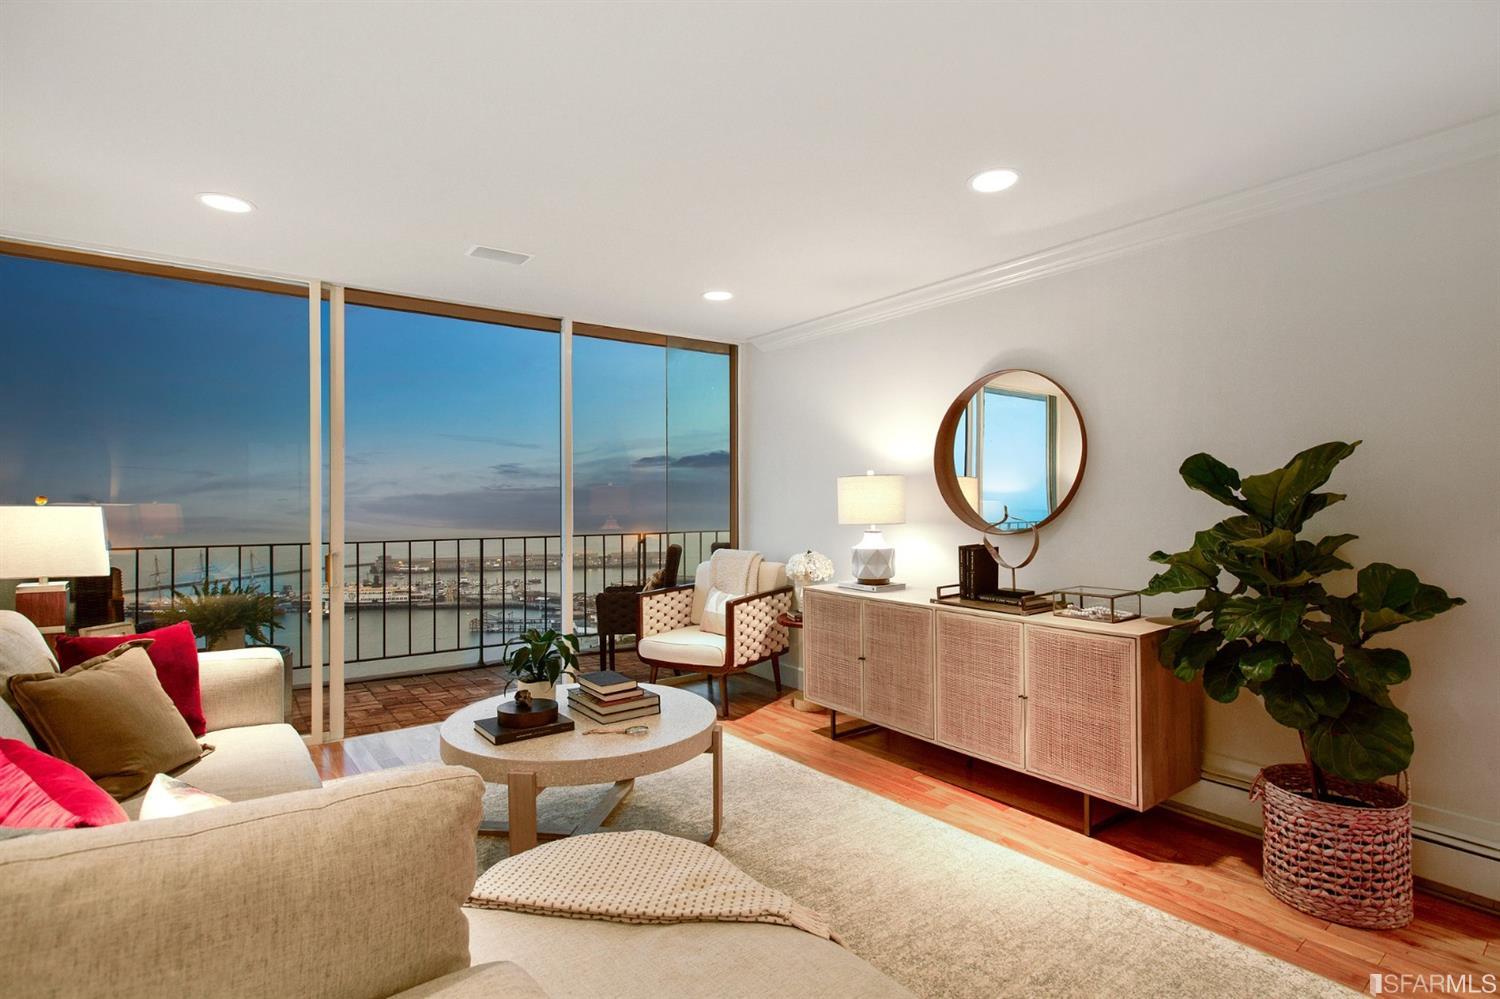 Living room with views of San Francisco's famed water front